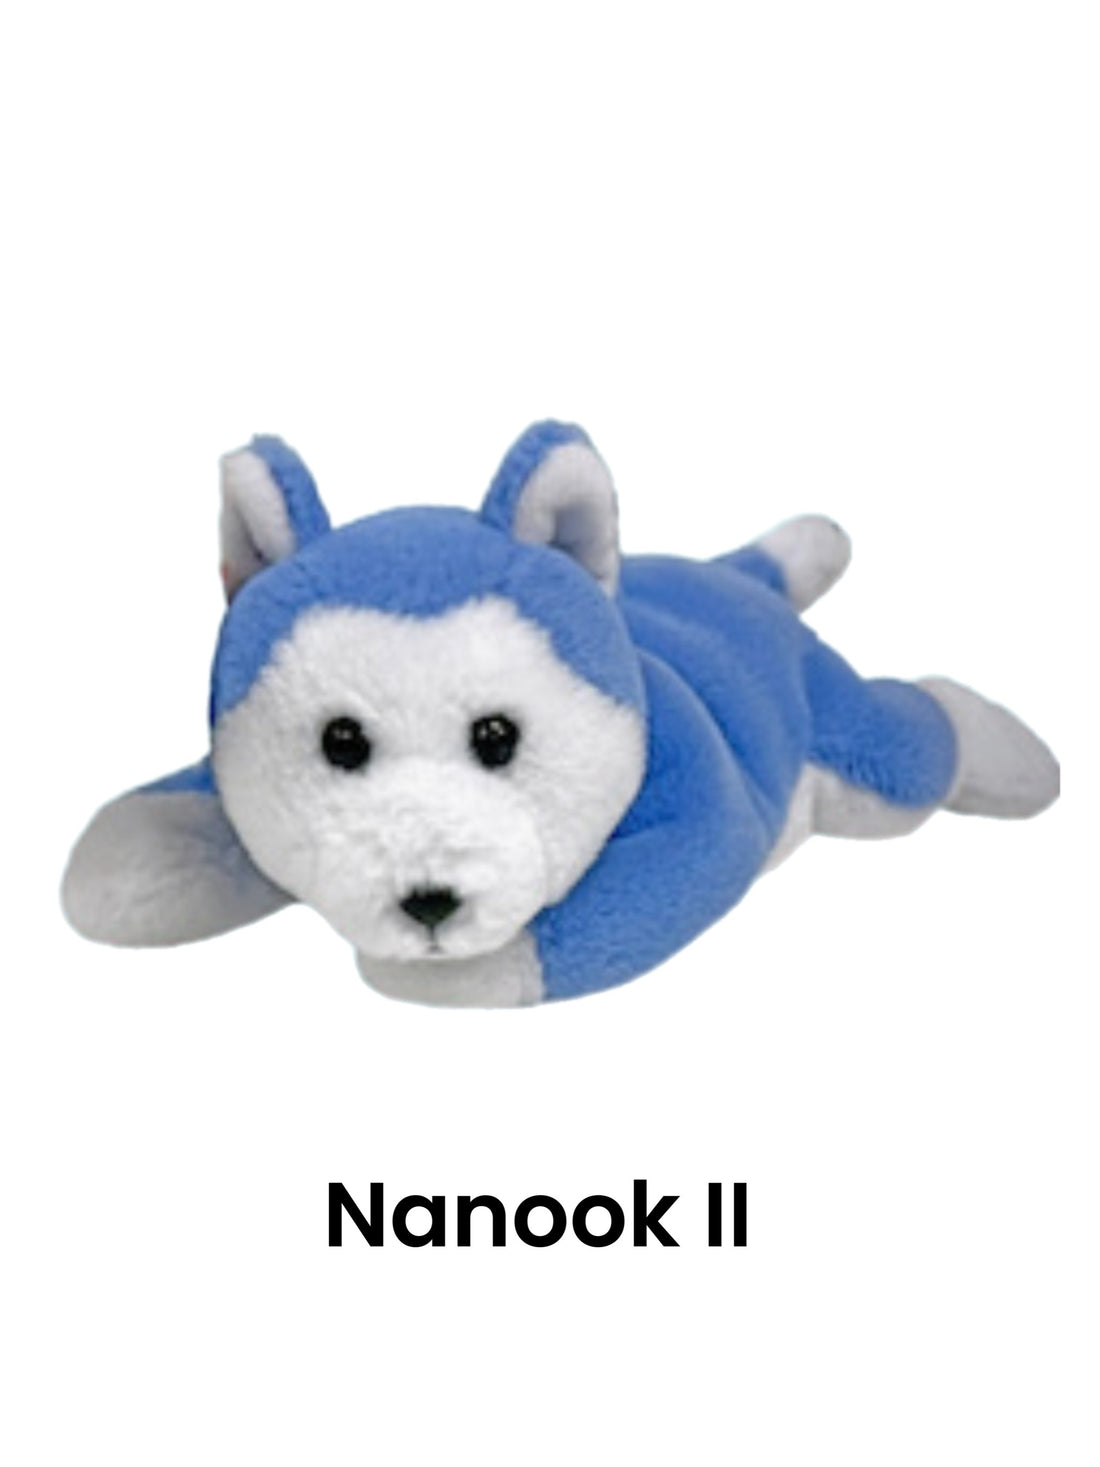 Ty Beanie Baby 30th Anniversary Limited Edition - Nanook II